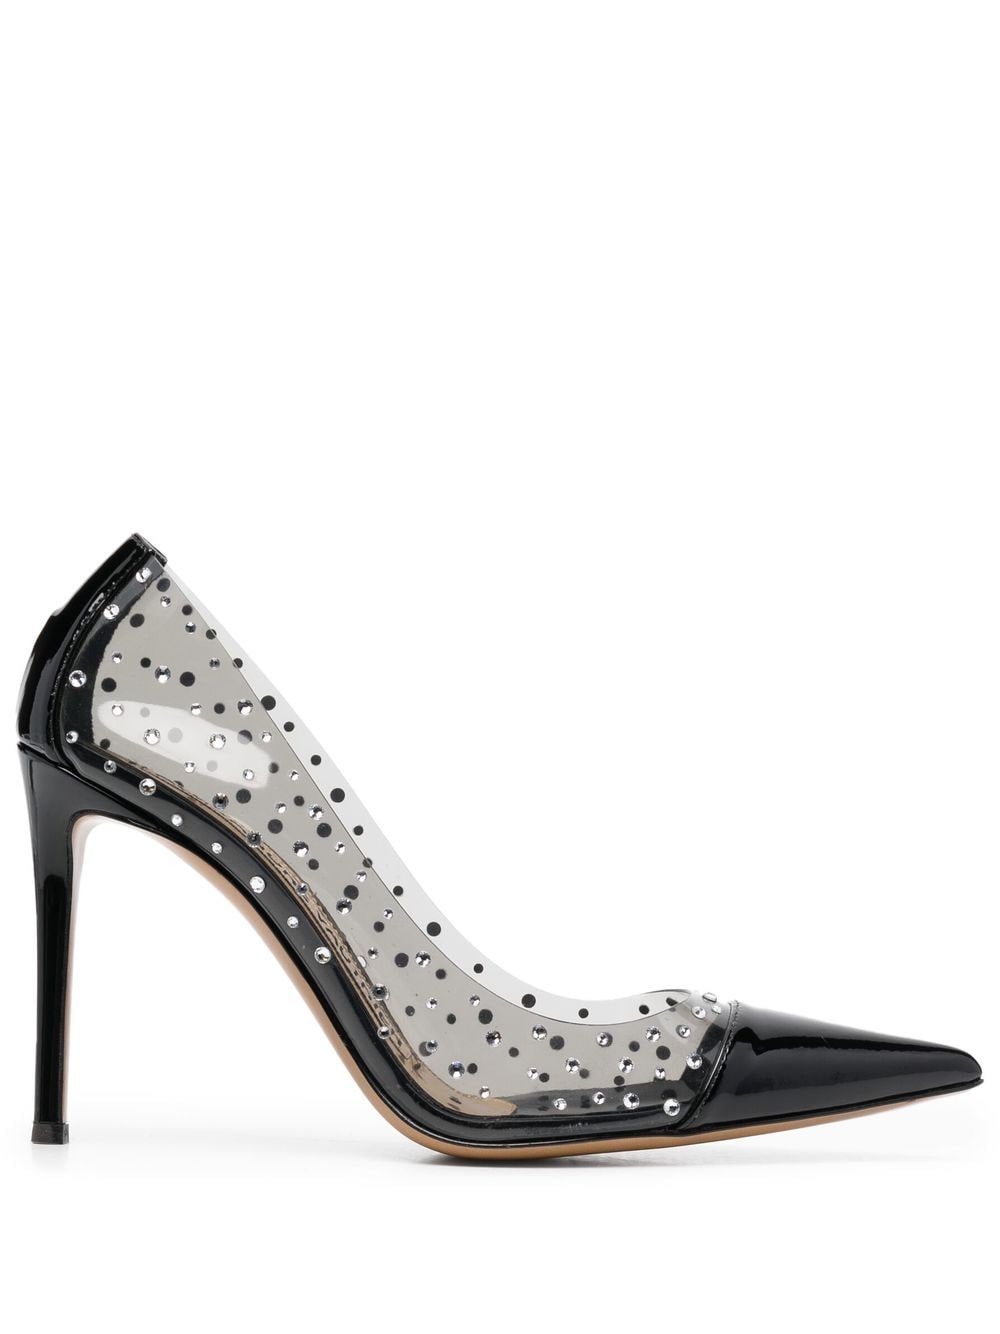 Ave 110mm studded pumps